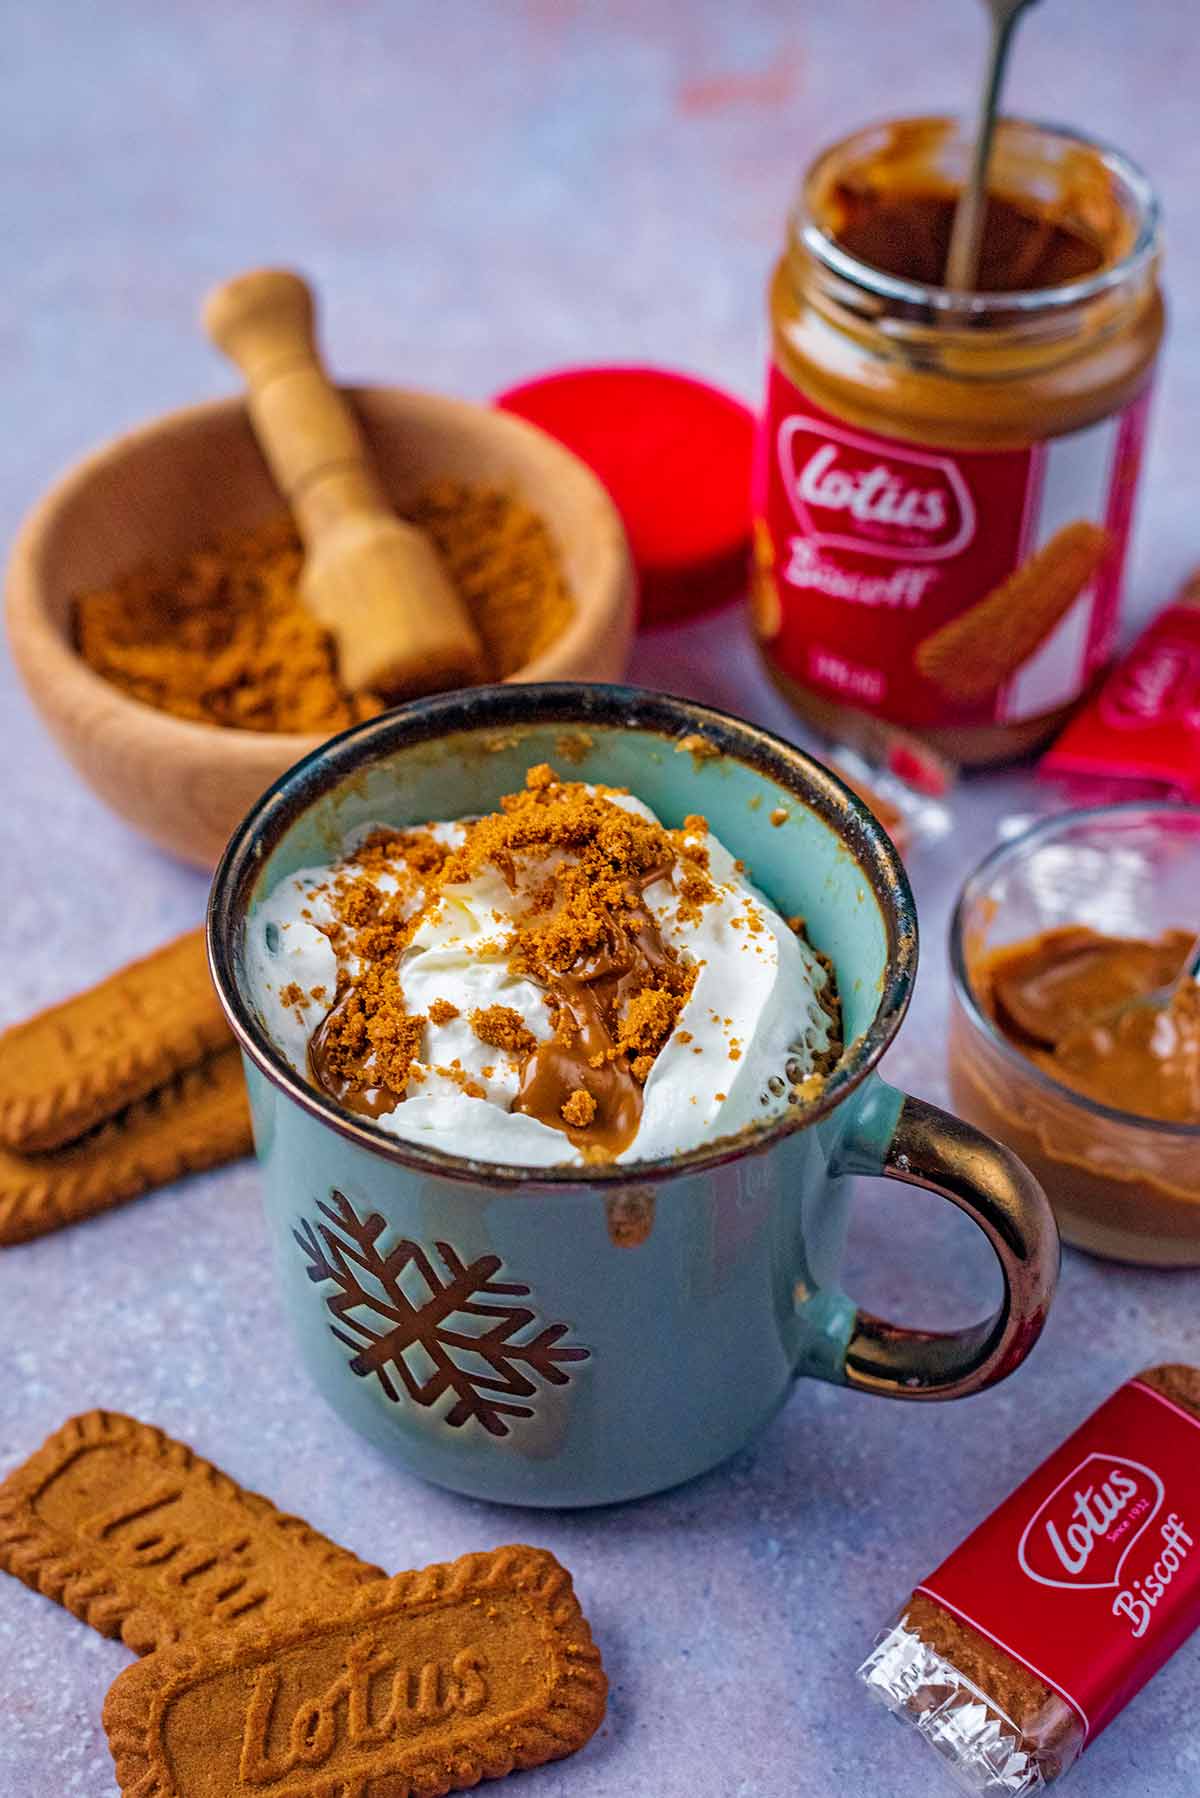 A mug cake topped with whipped cream and crushed Biscoff biscuit.